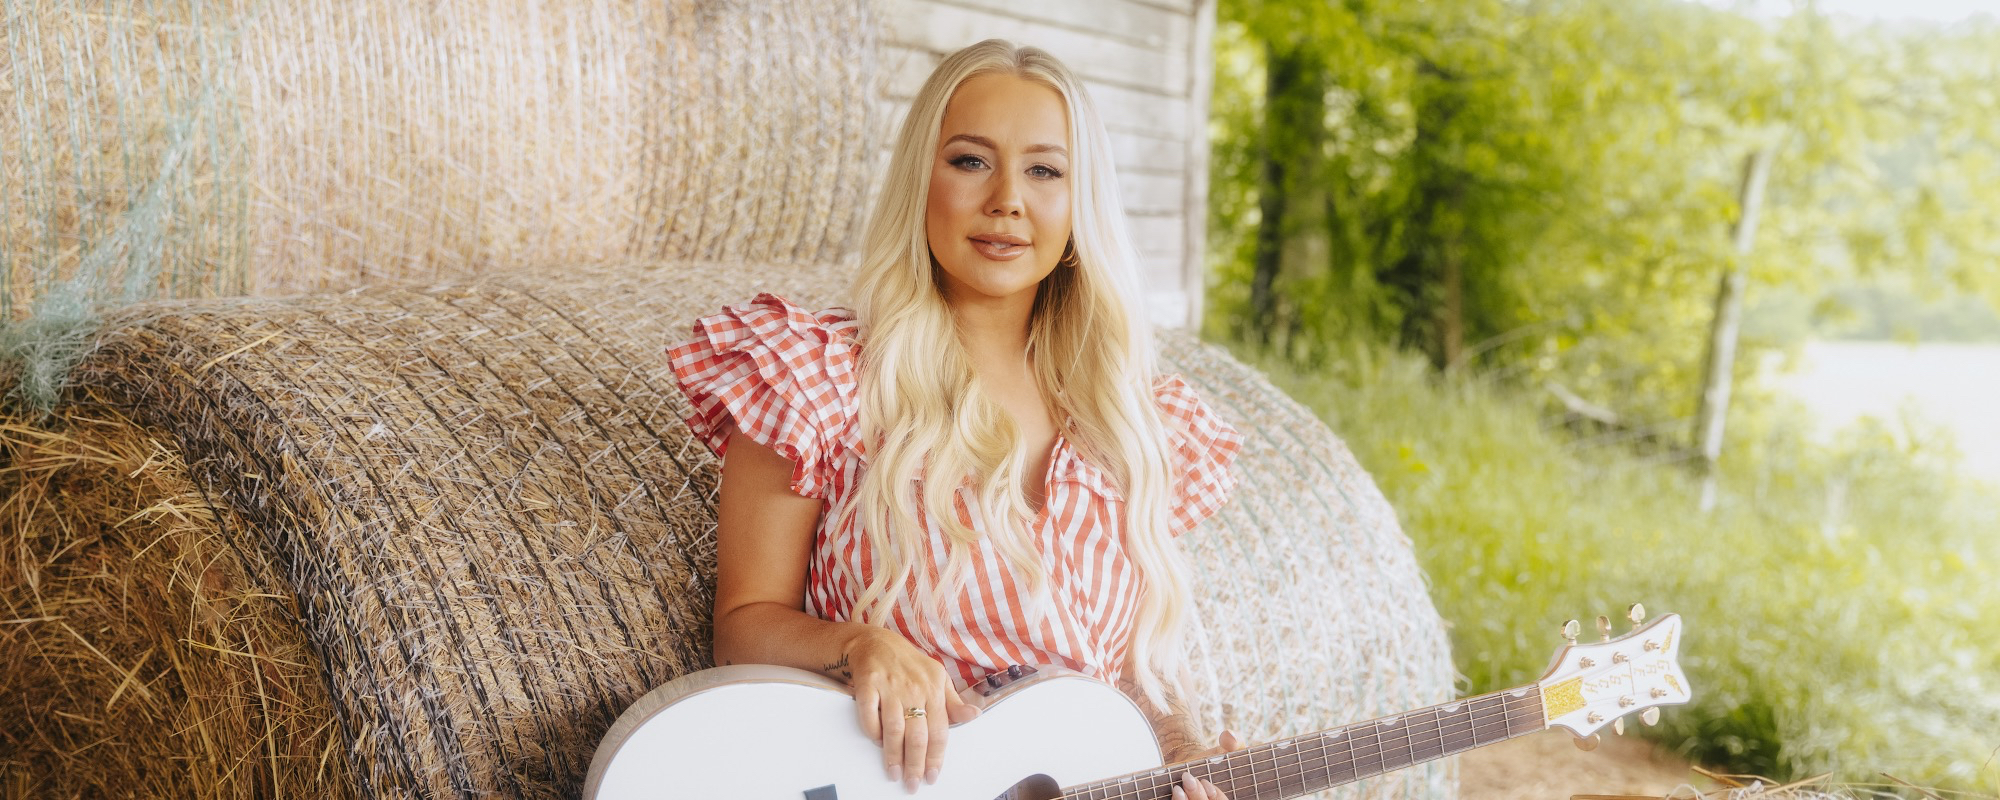 RaeLynn Wants to Know “What’s Wrong With That?” in New Summer Bop [Exclusive Premiere]